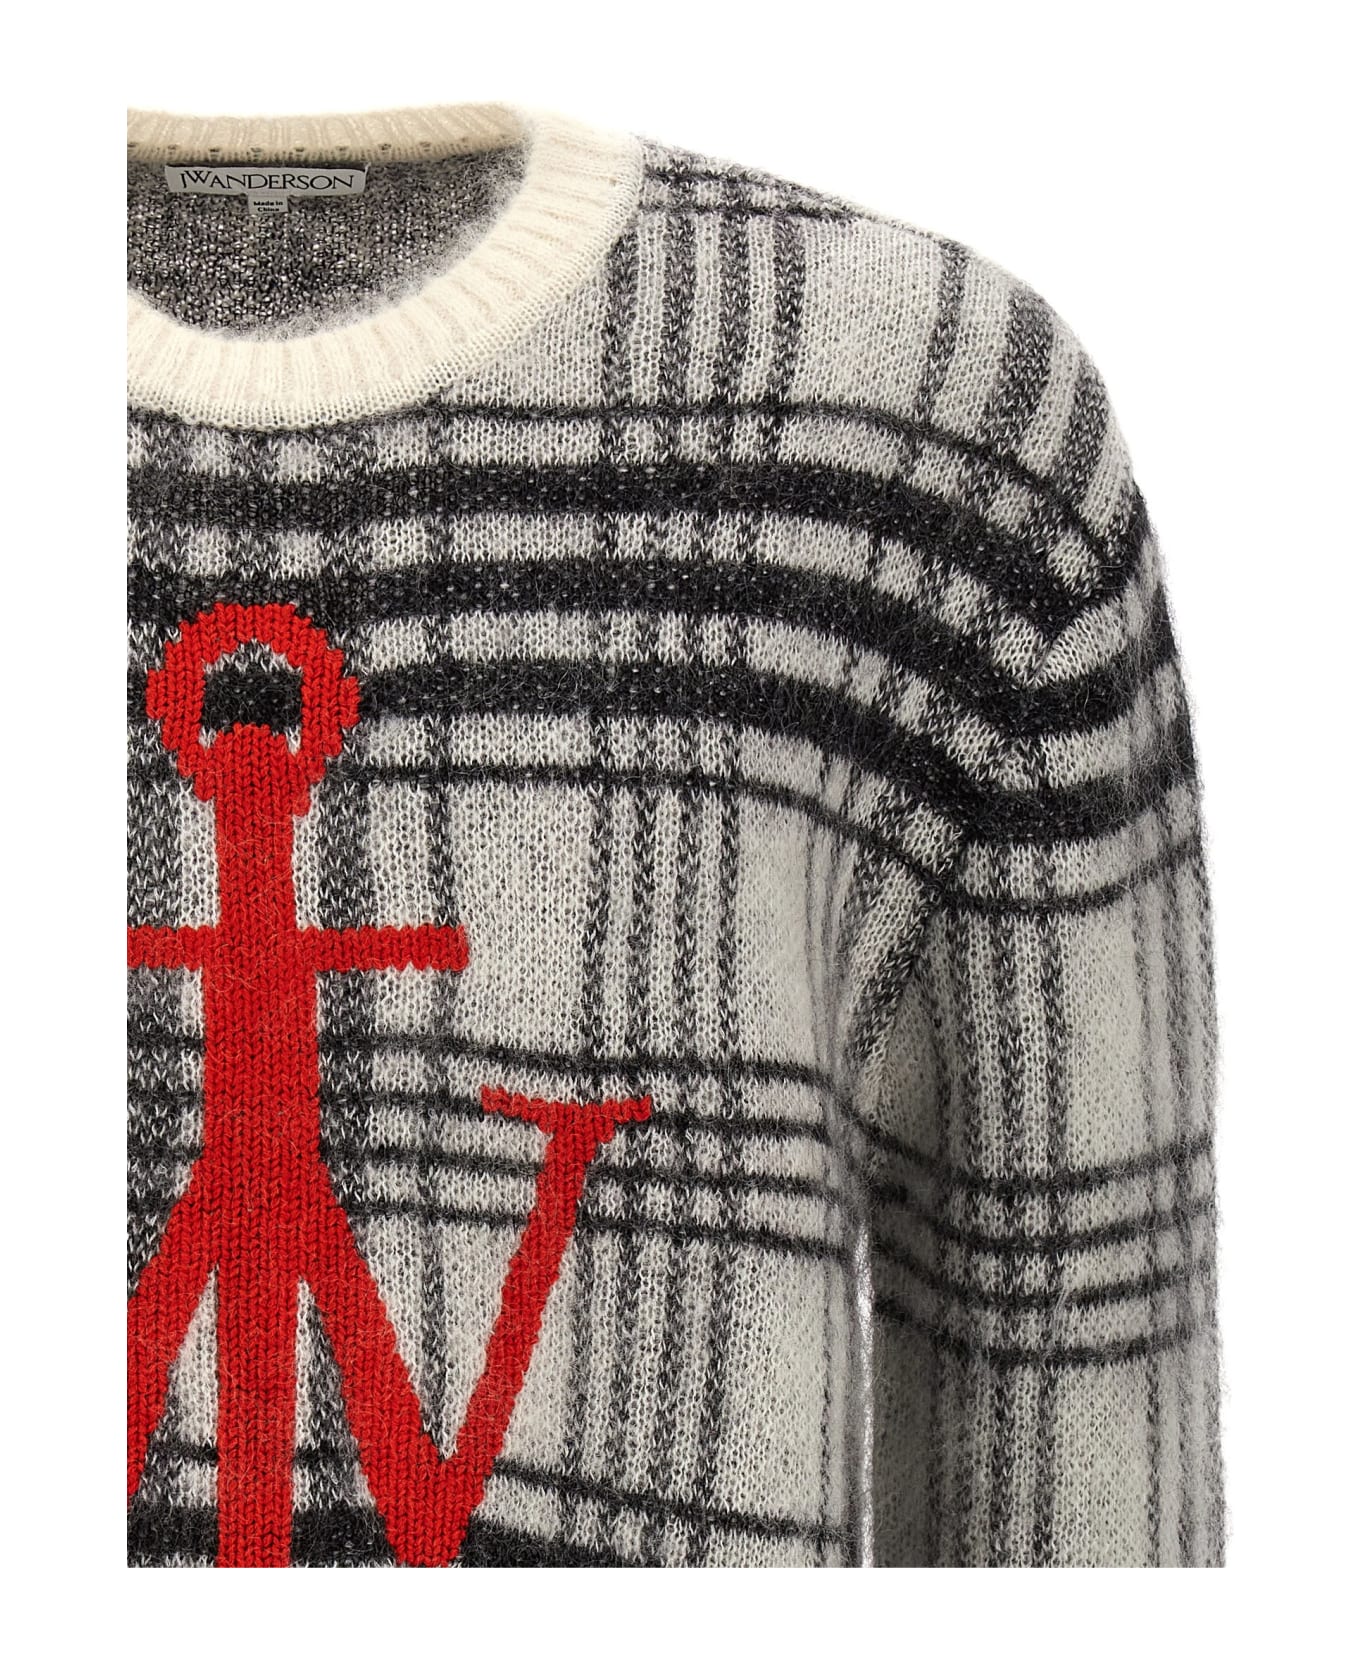 J.W. Anderson Logo Embroidery Check Sweater - White/Black ニットウェア